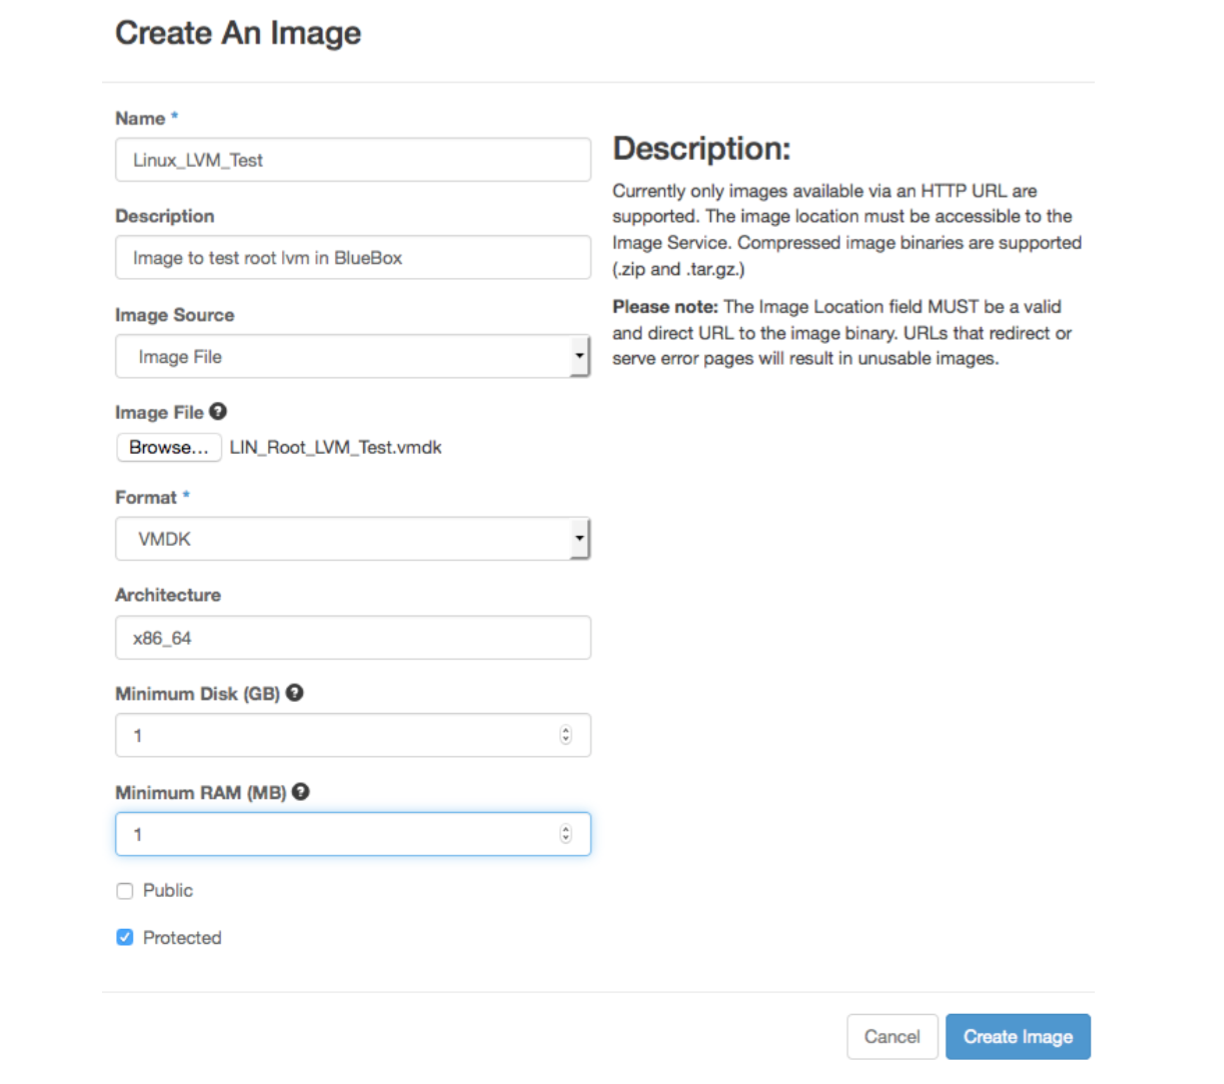 Upload the image with the OpenStack dashboard